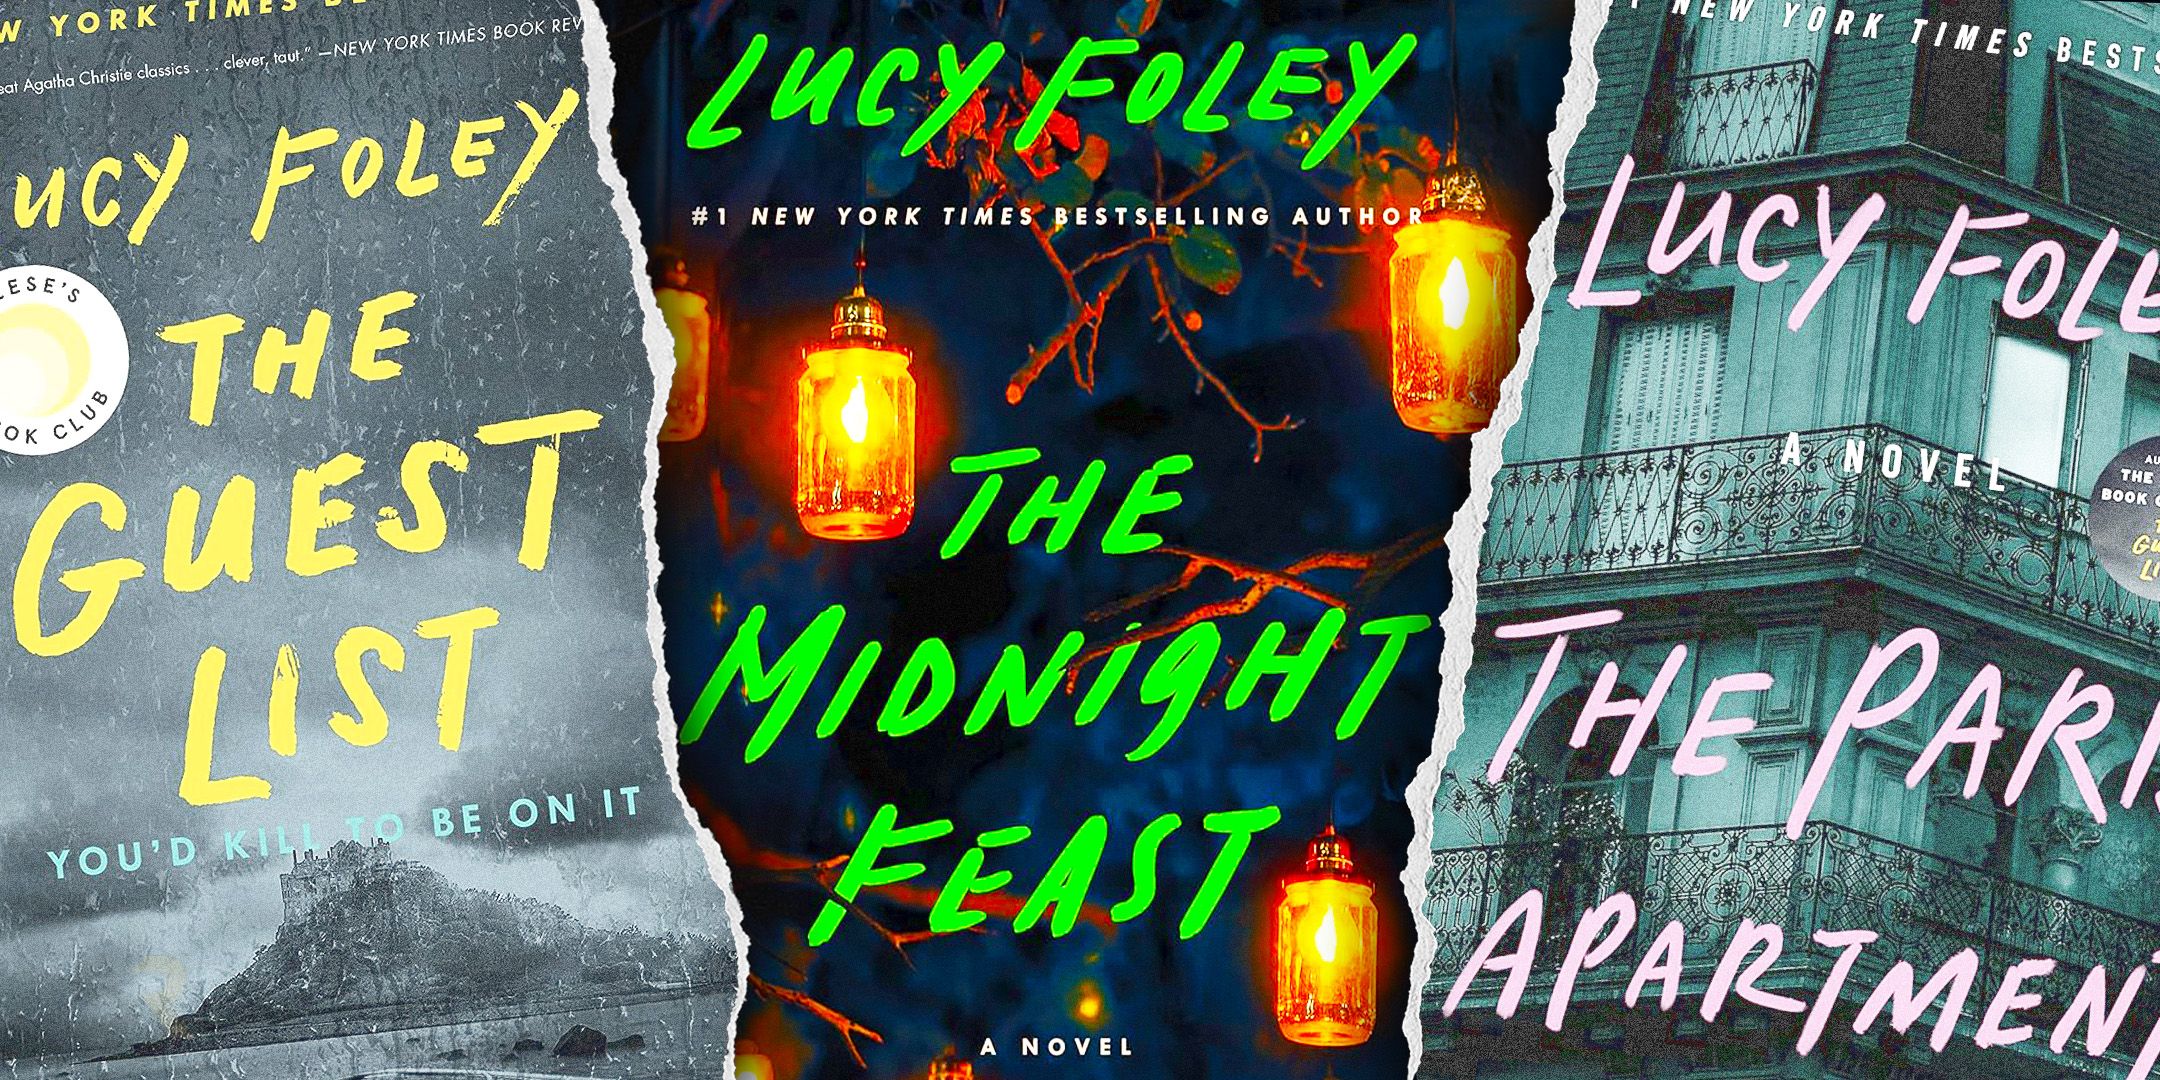 “The Midnight Feast” continues Lucy Foley’s most controversial book trend